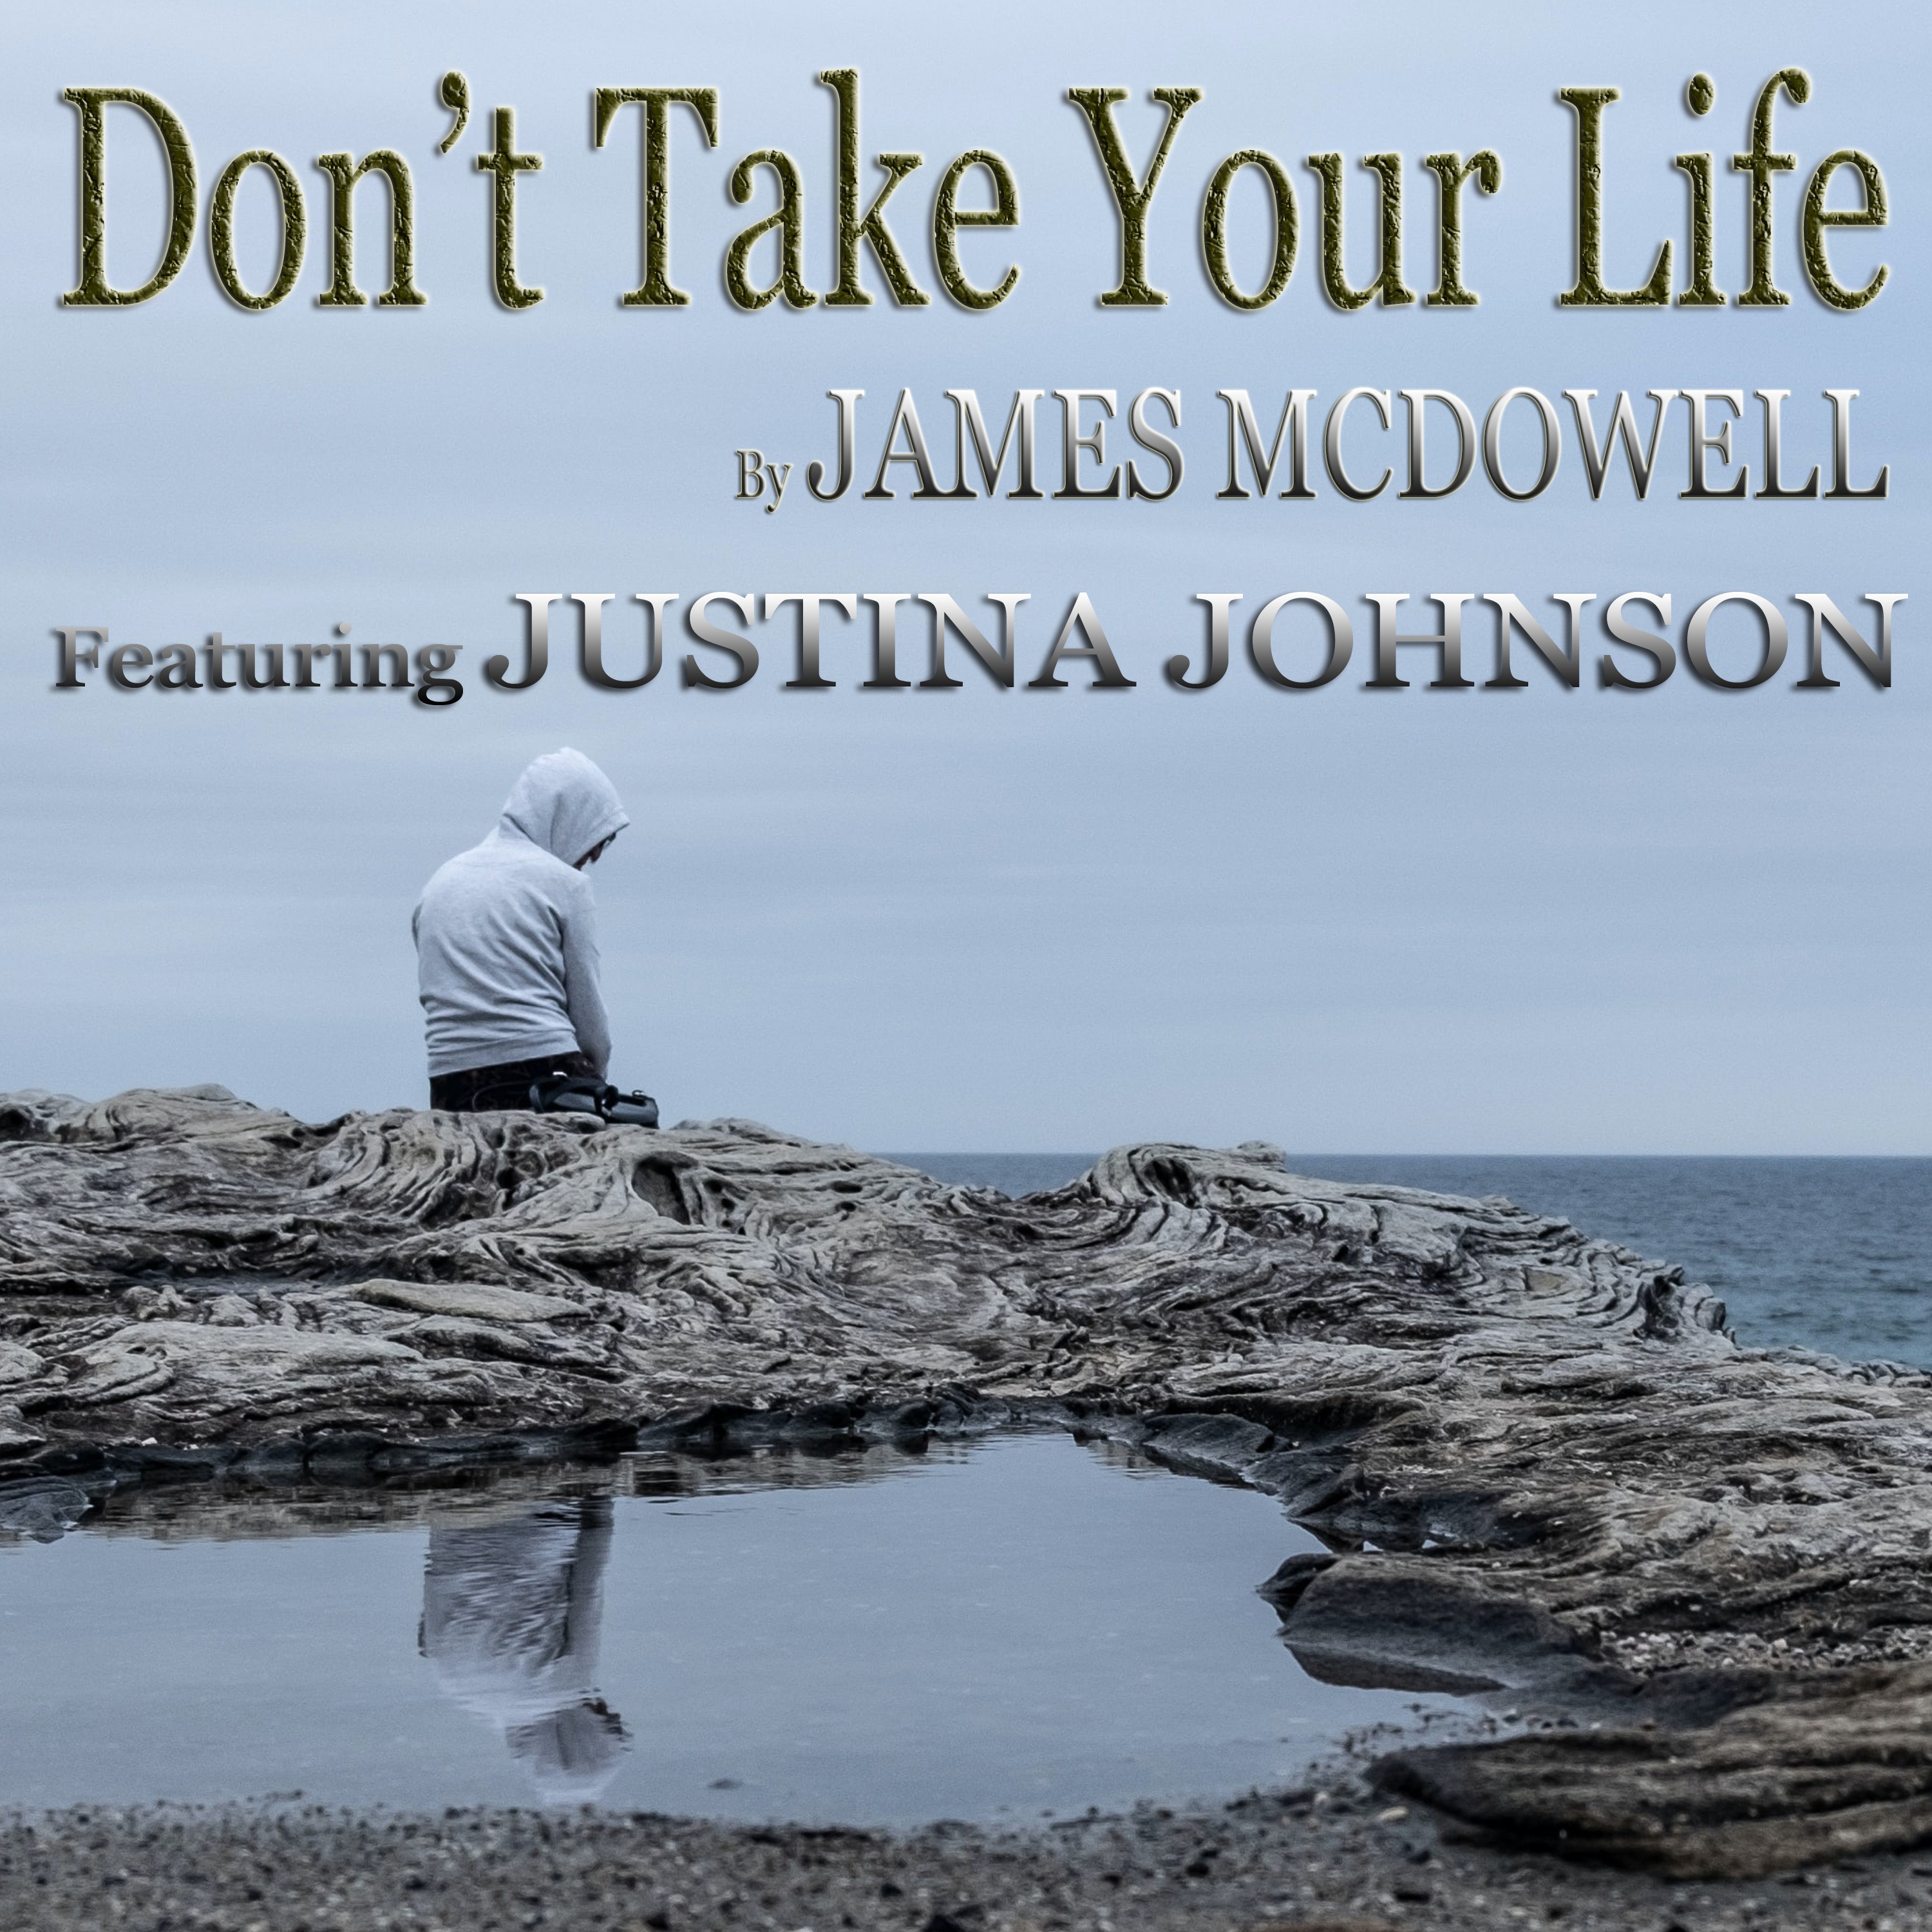 A Scintillating New Track That Spreads The Simple Message of Hope: James McDowell Releases A Moving New Track.